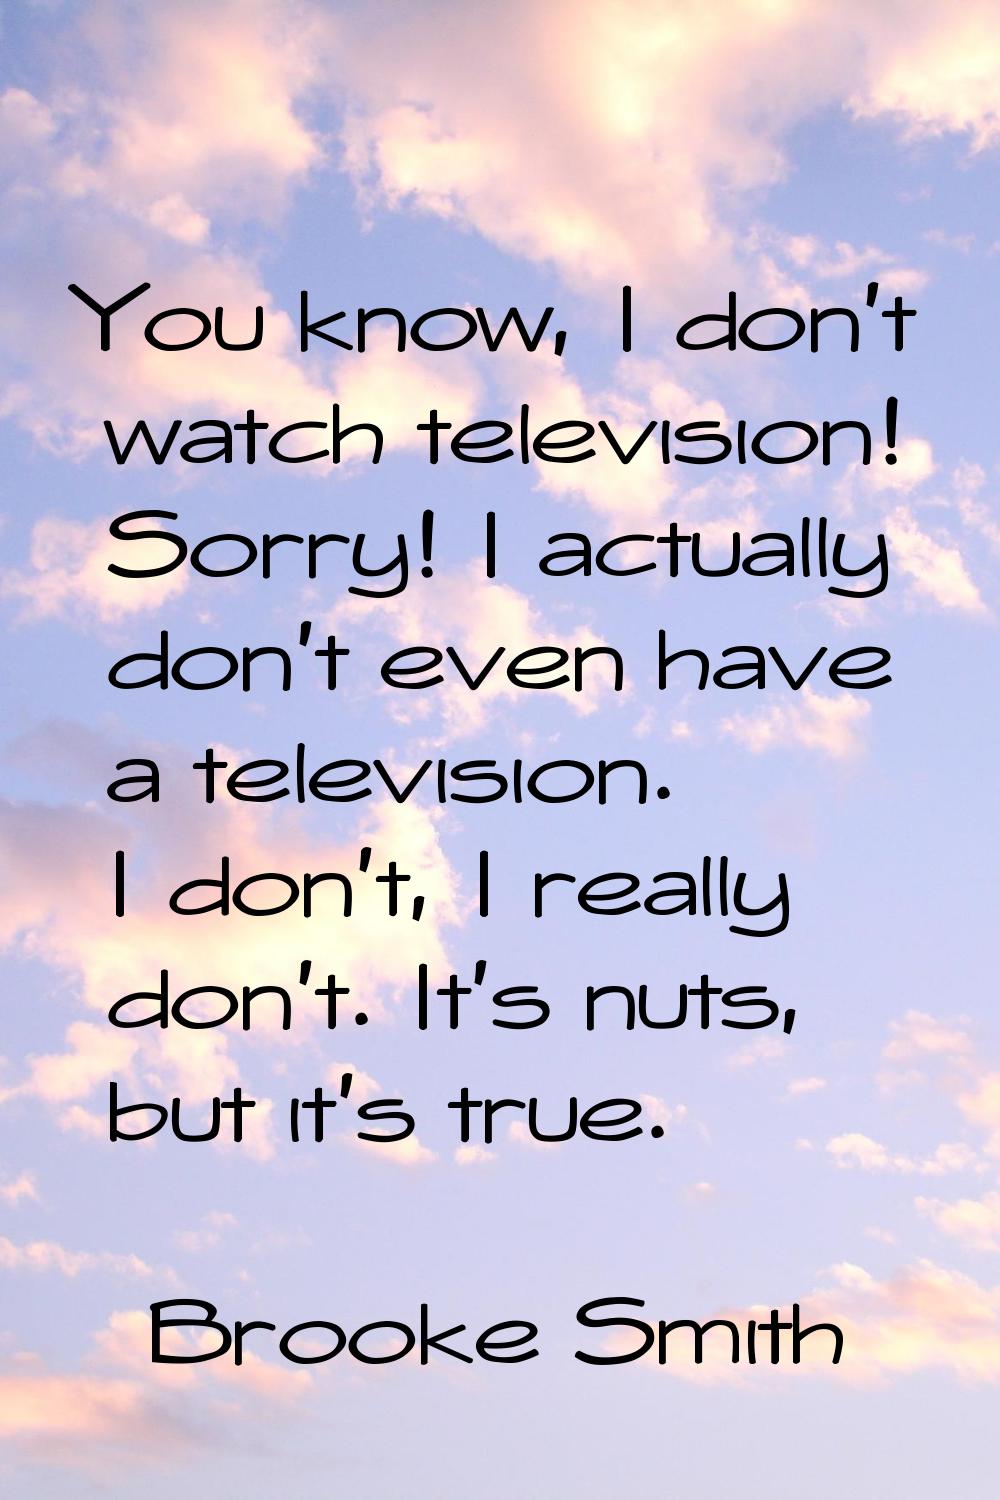 You know, I don't watch television! Sorry! I actually don't even have a television. I don't, I real